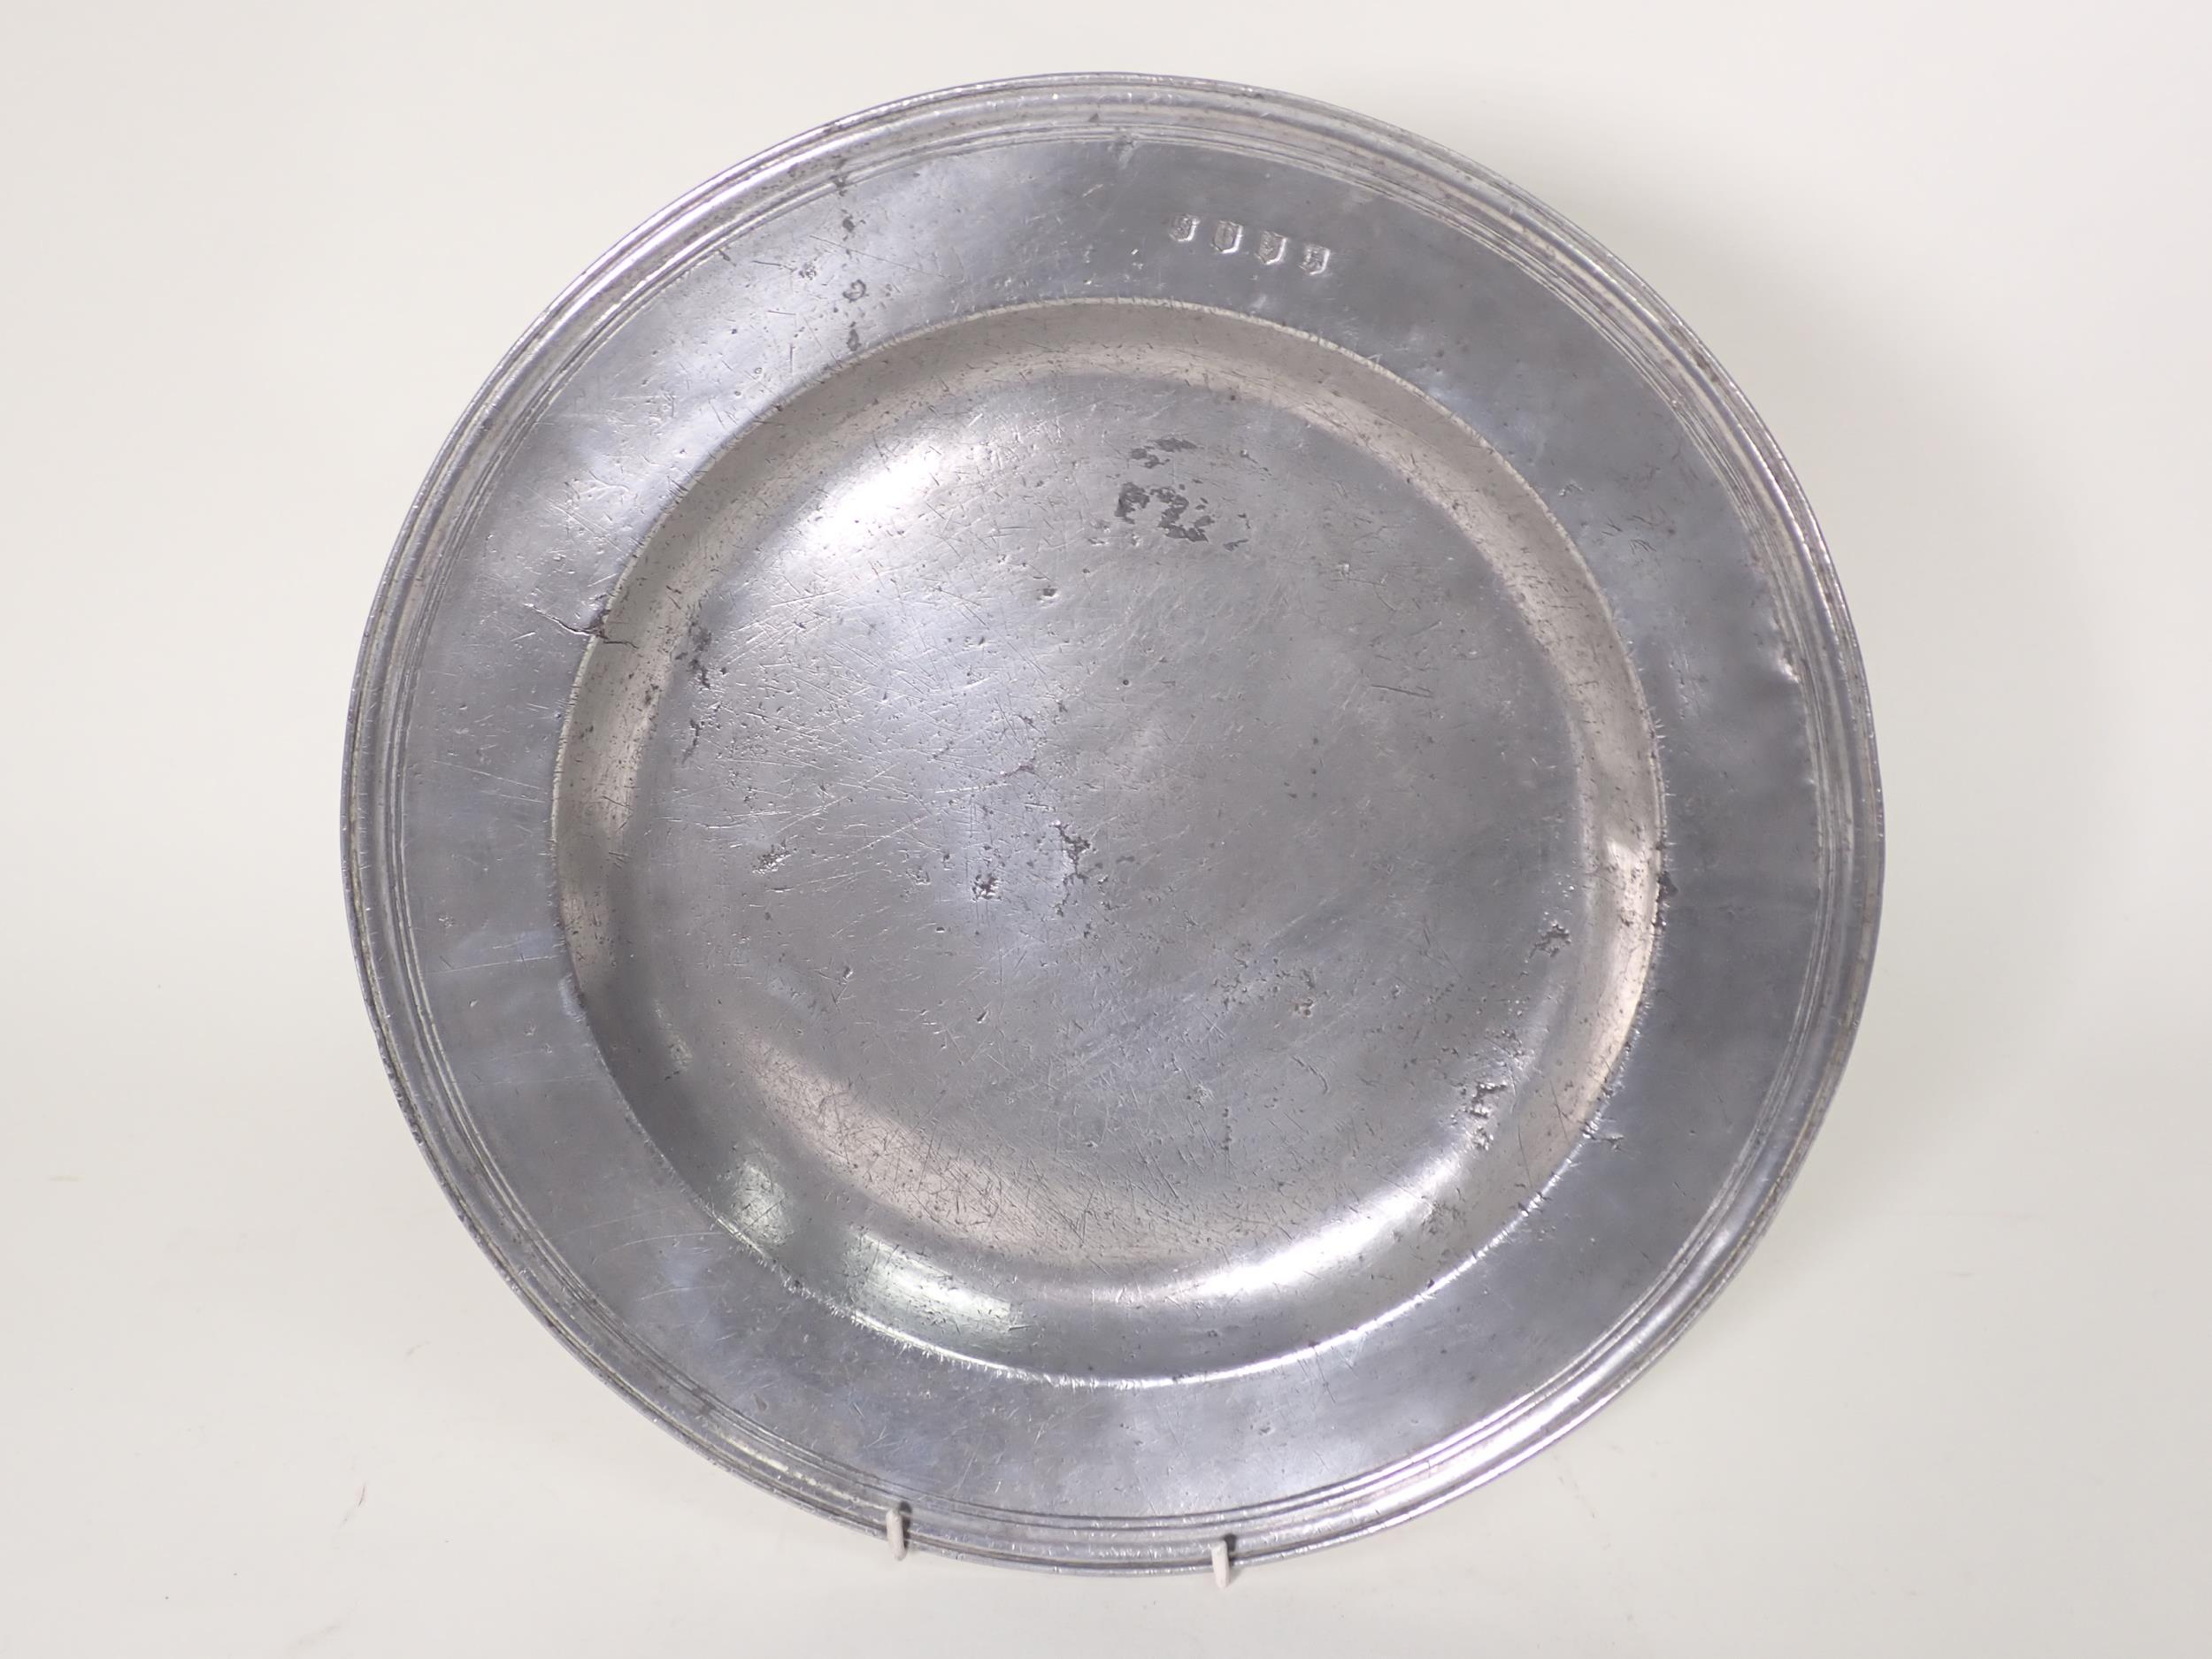 A c.1700 Pewter Charger with touchmarks for John Silk, with reeded edge, 13 1/2in diam - Image 2 of 4